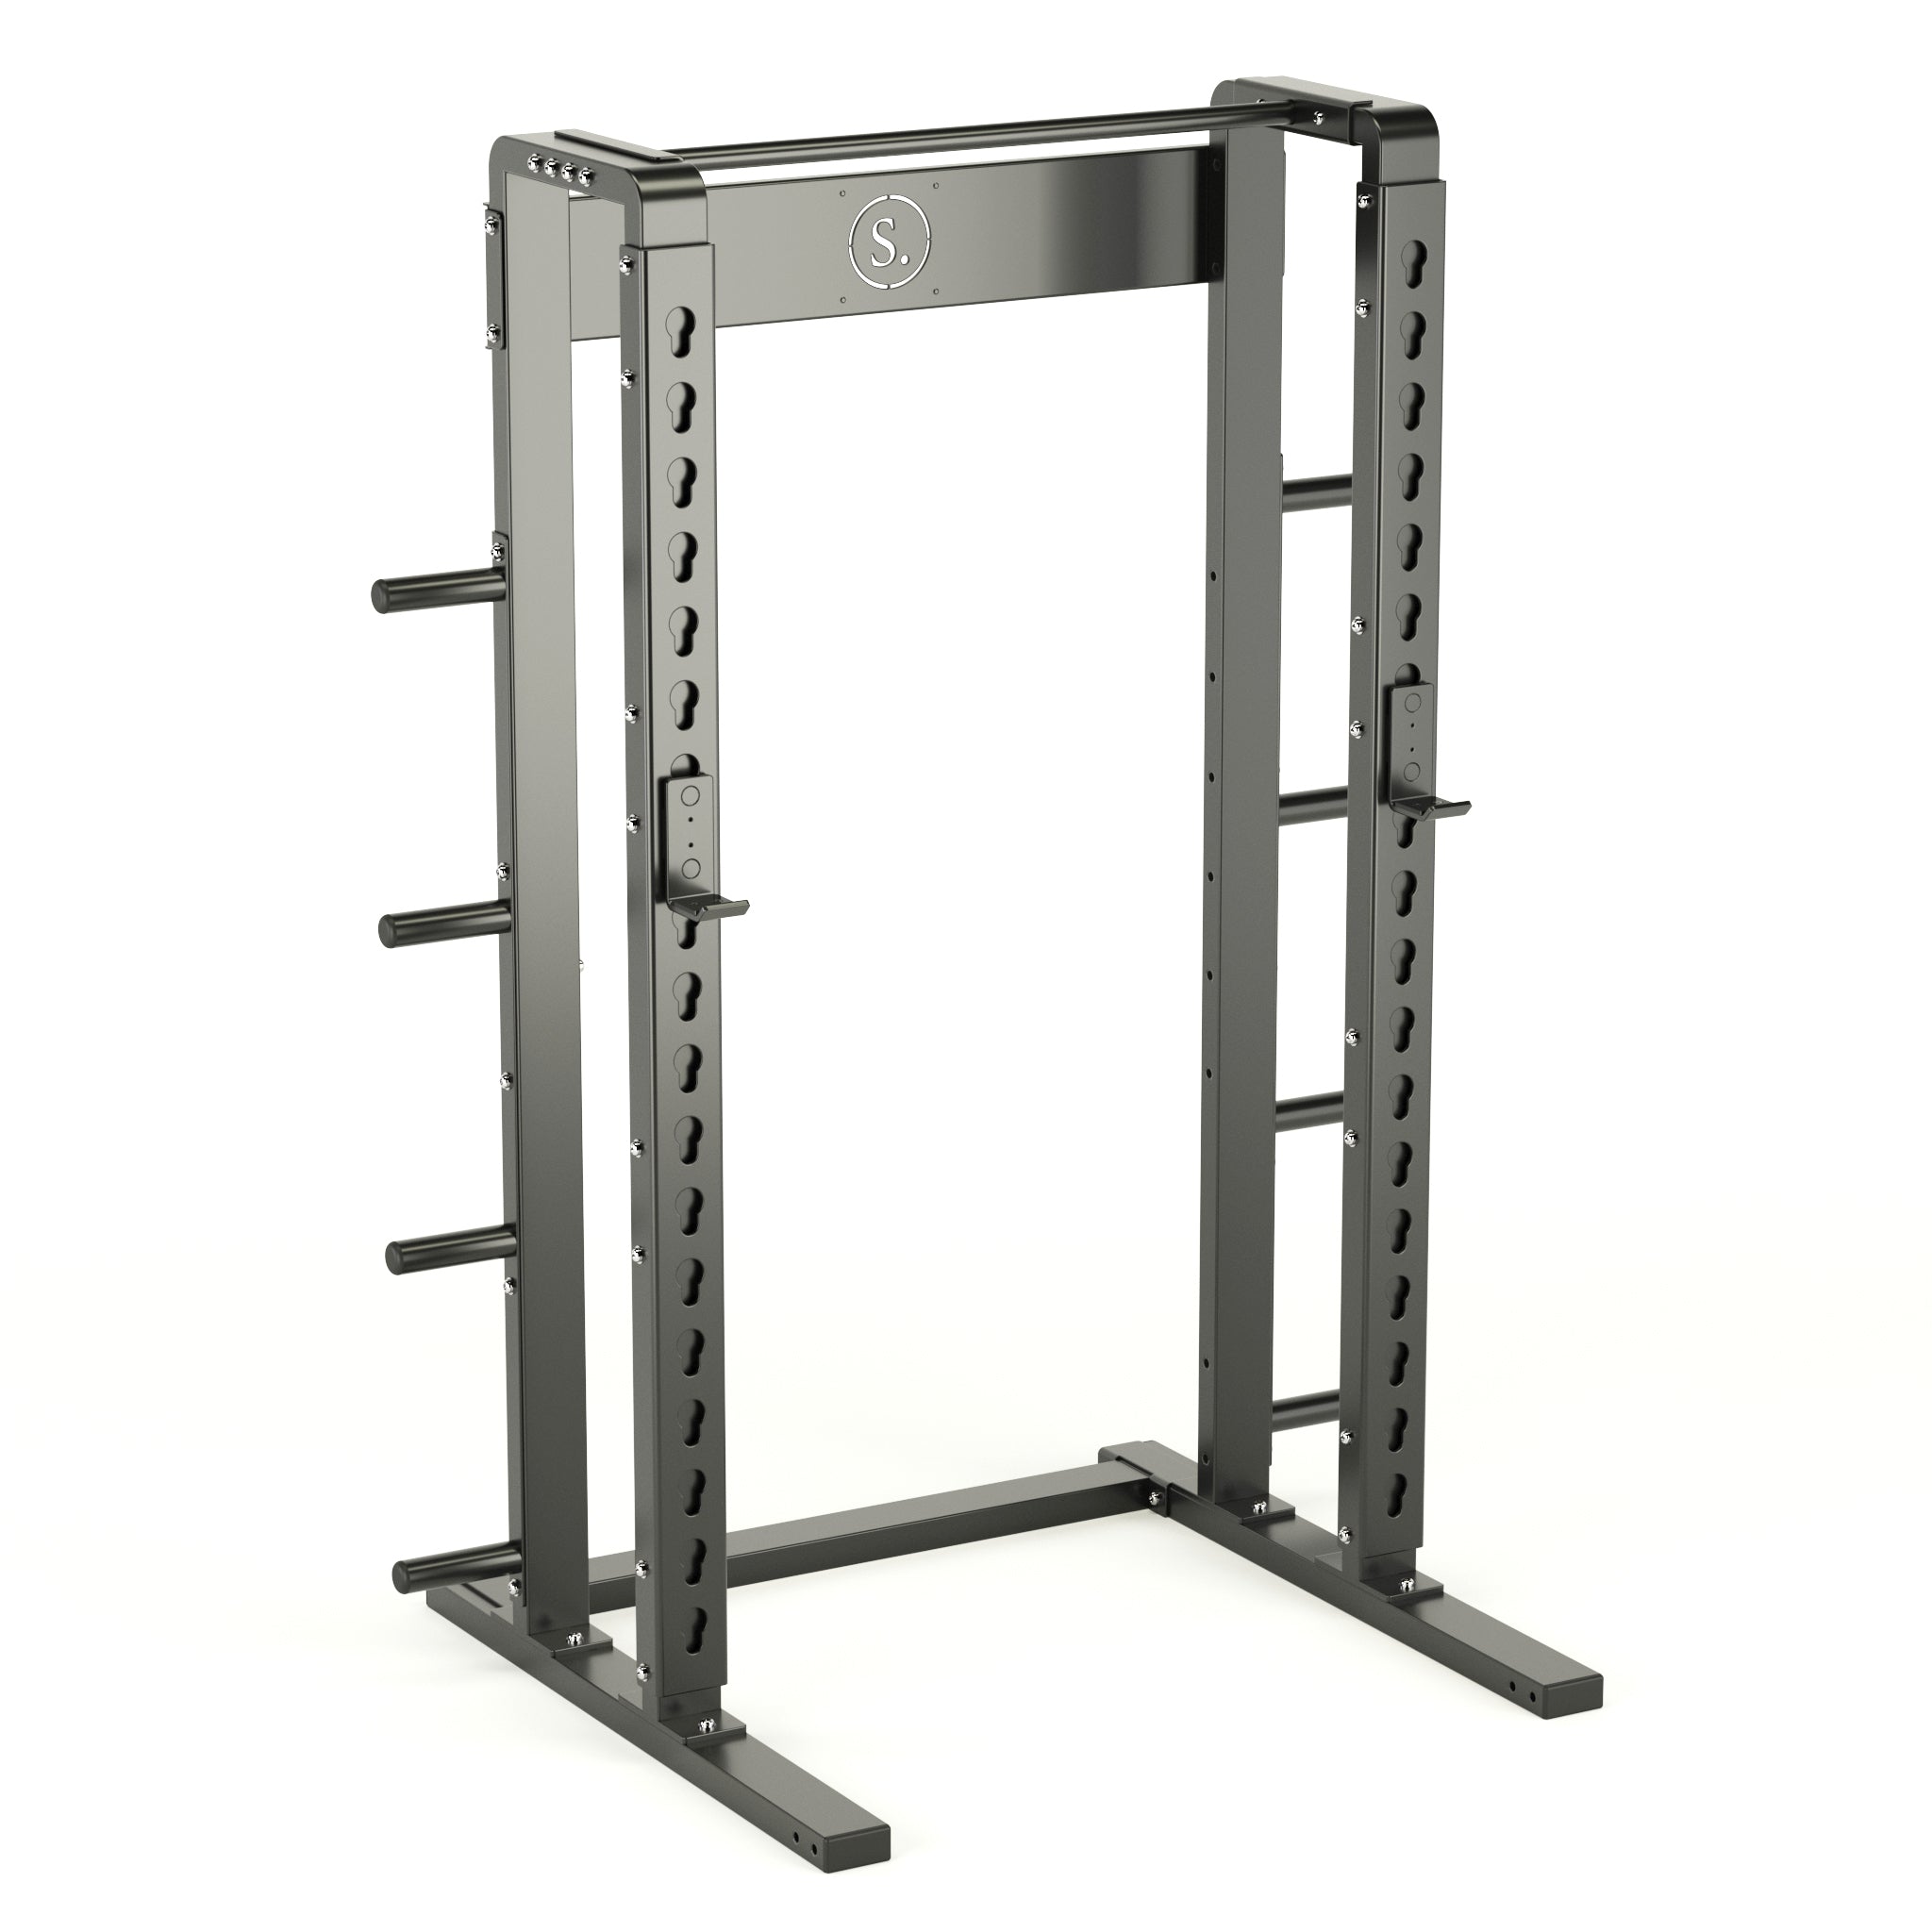 Solo Squat Rack in black with weight horns